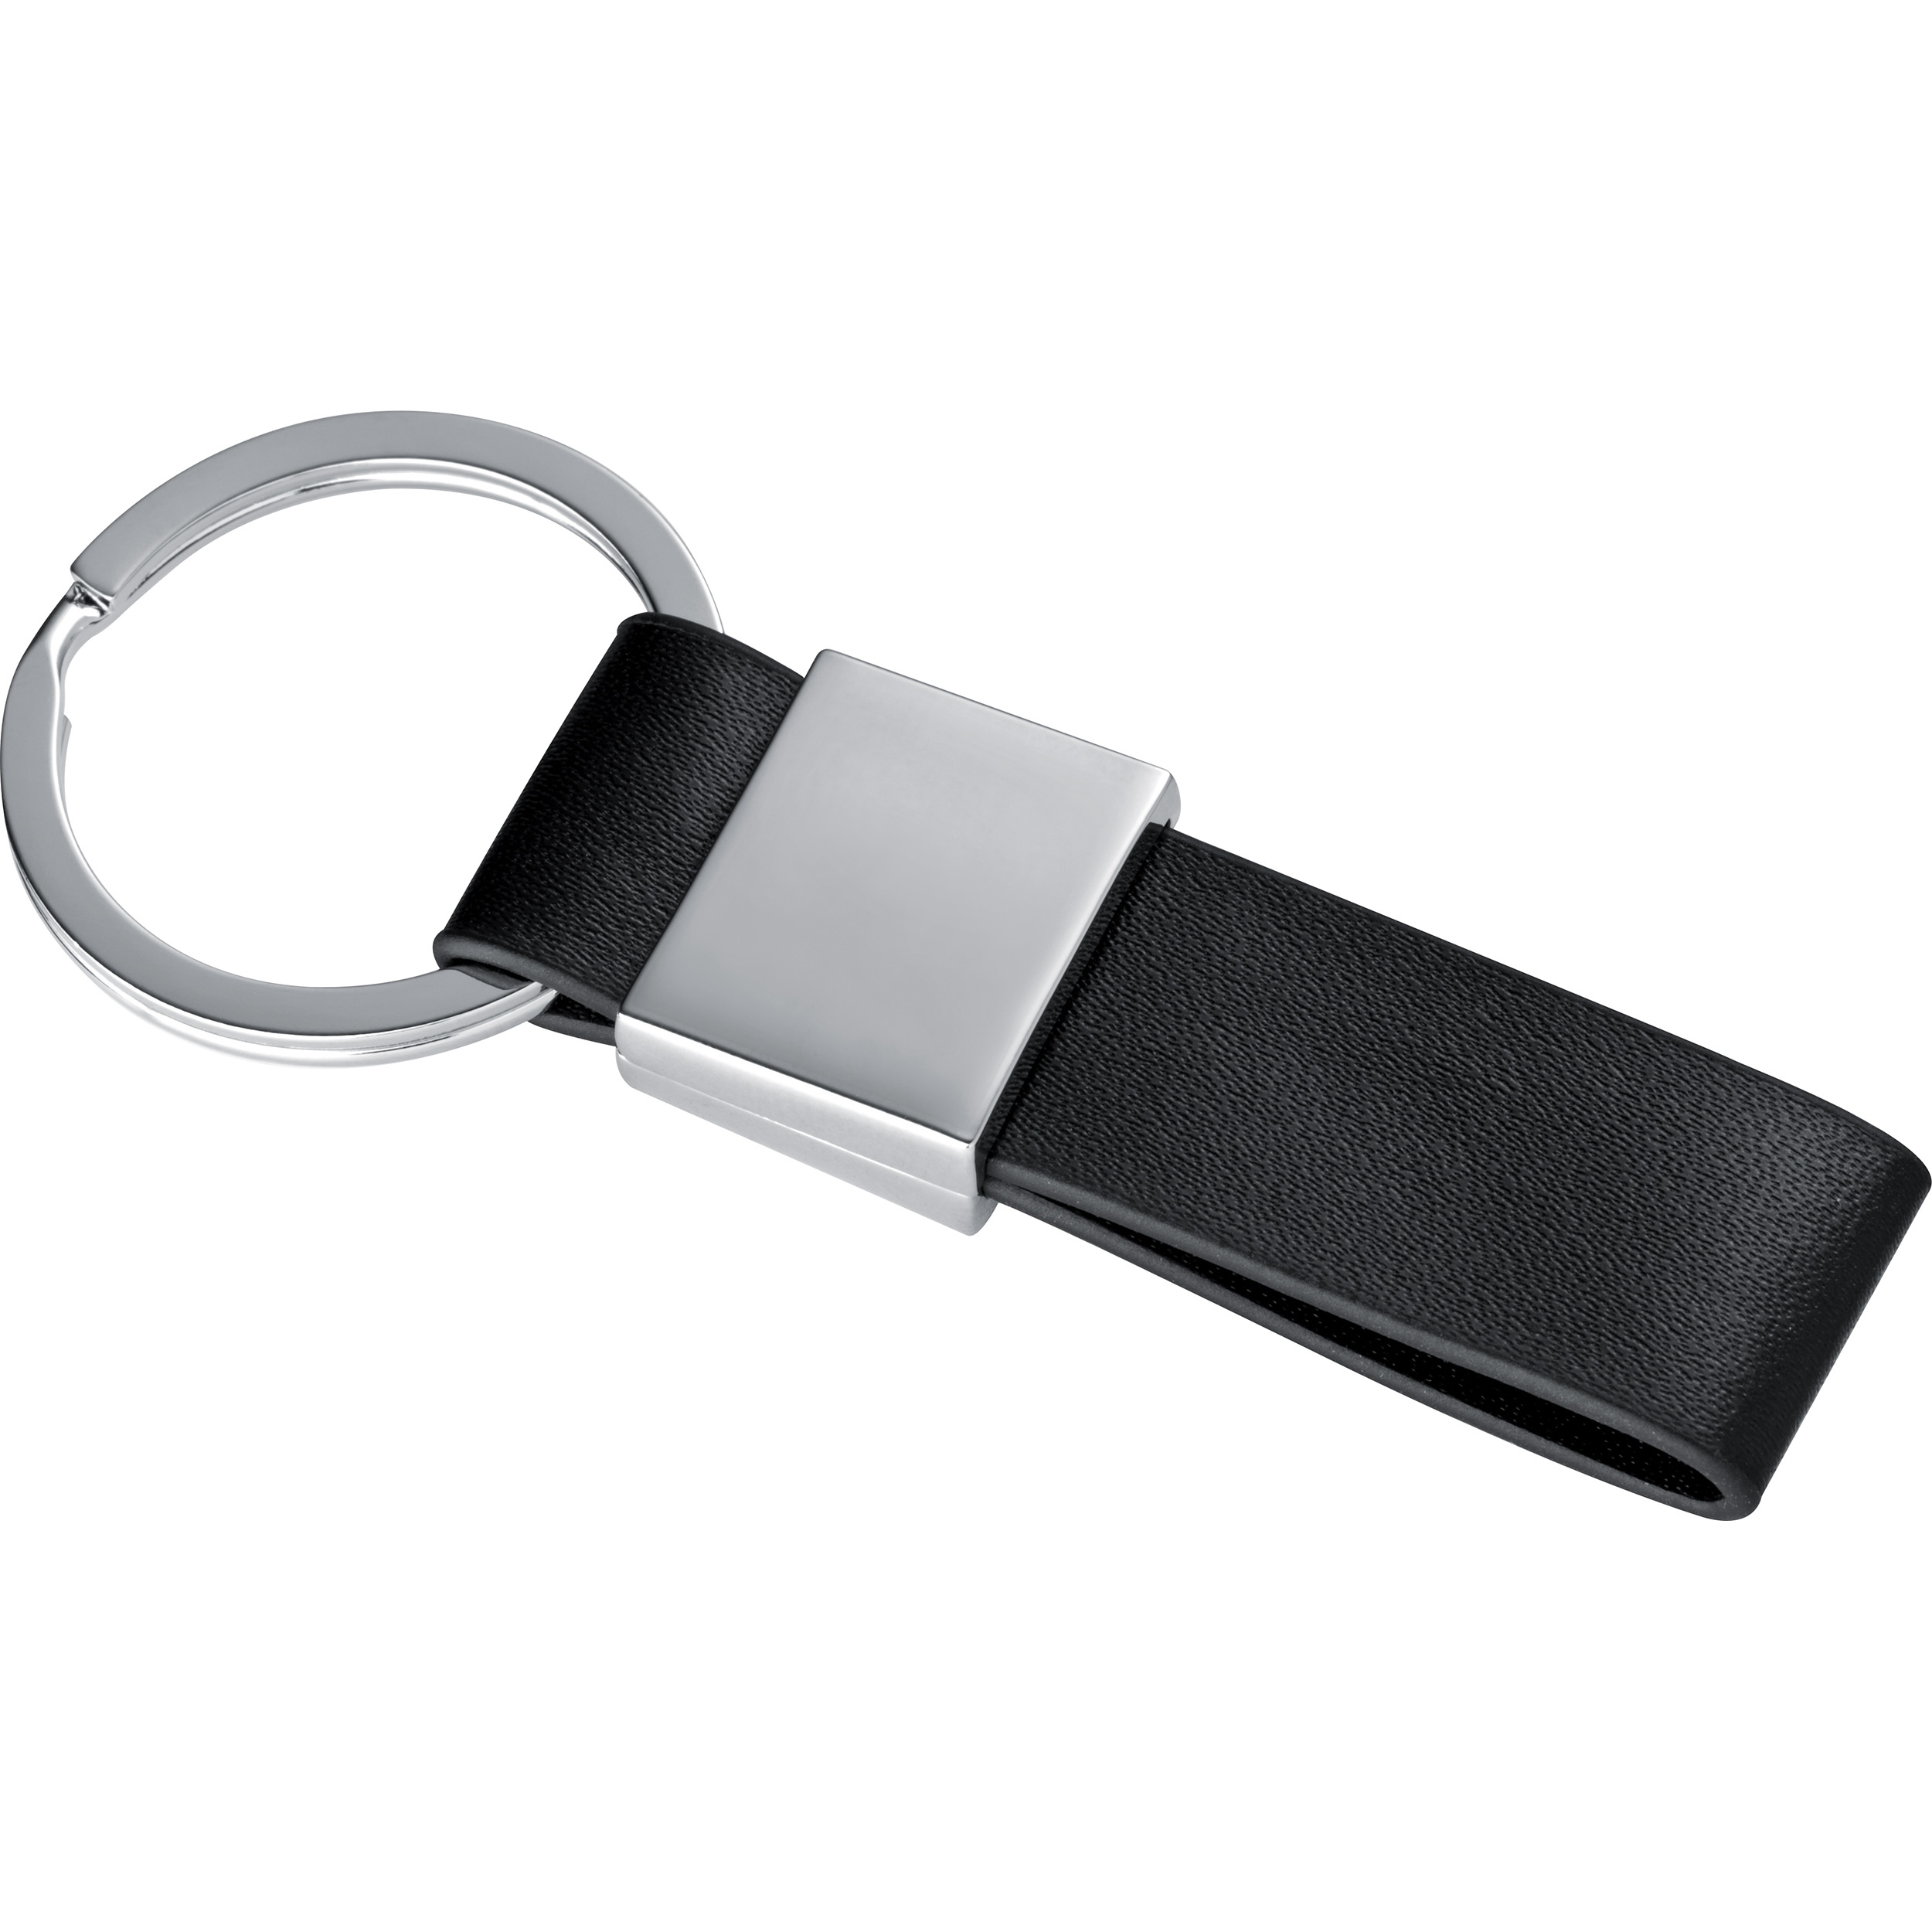 Keyring with a black PU strap